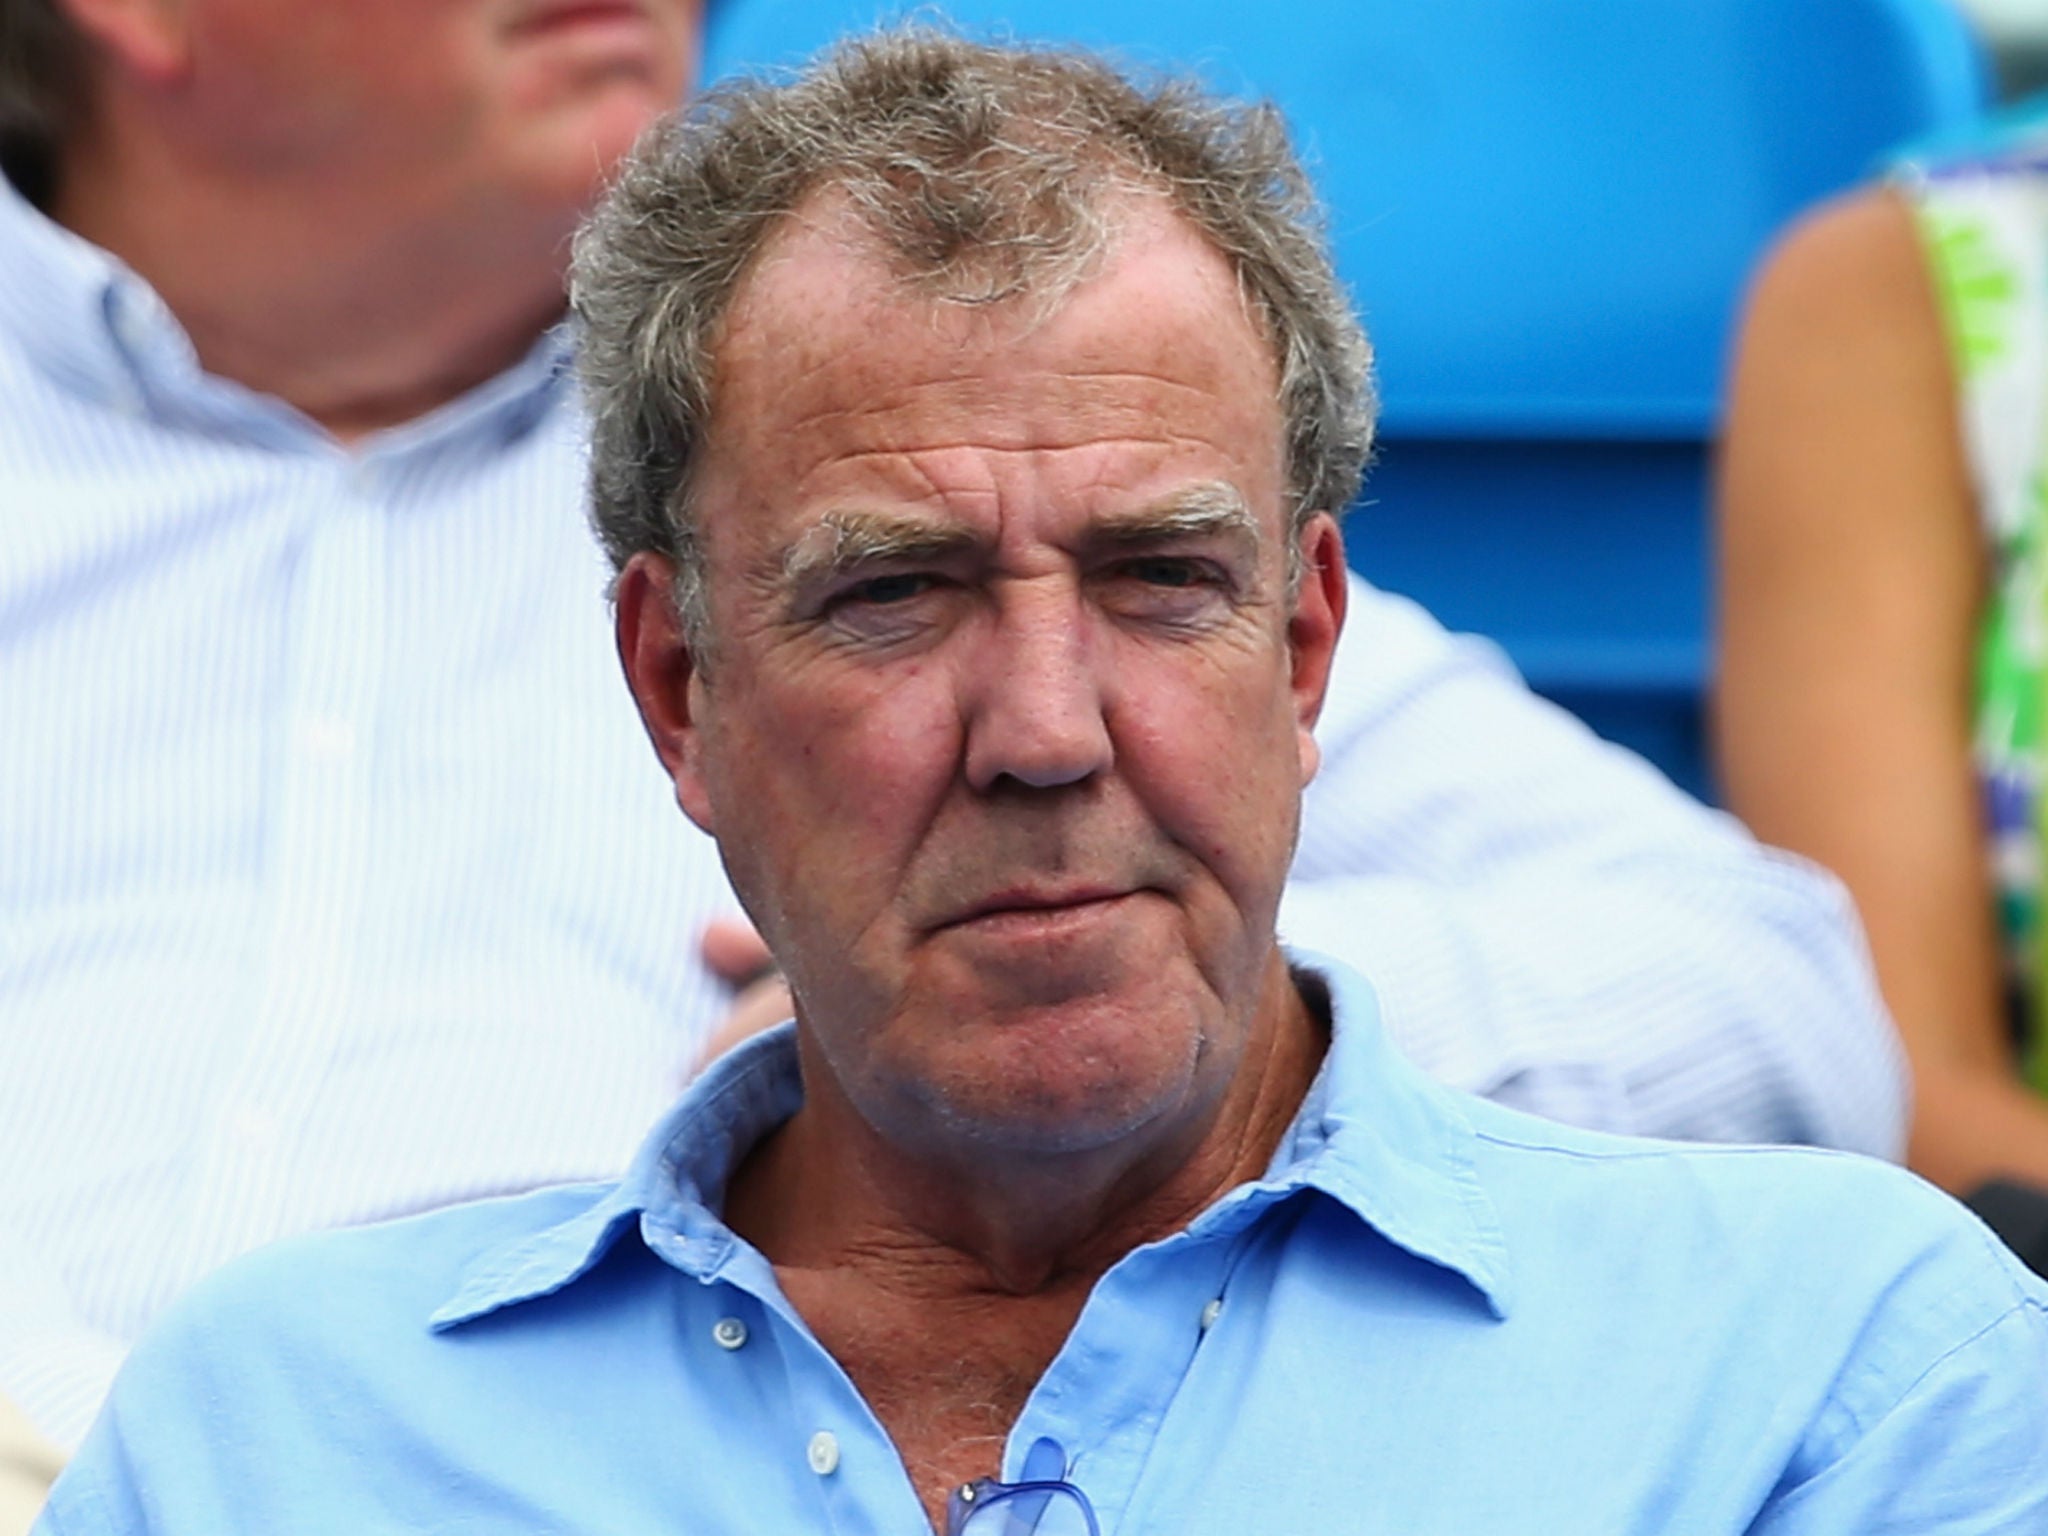 Clarkson reportedly ordered in a range rover 'just so he could look at it'